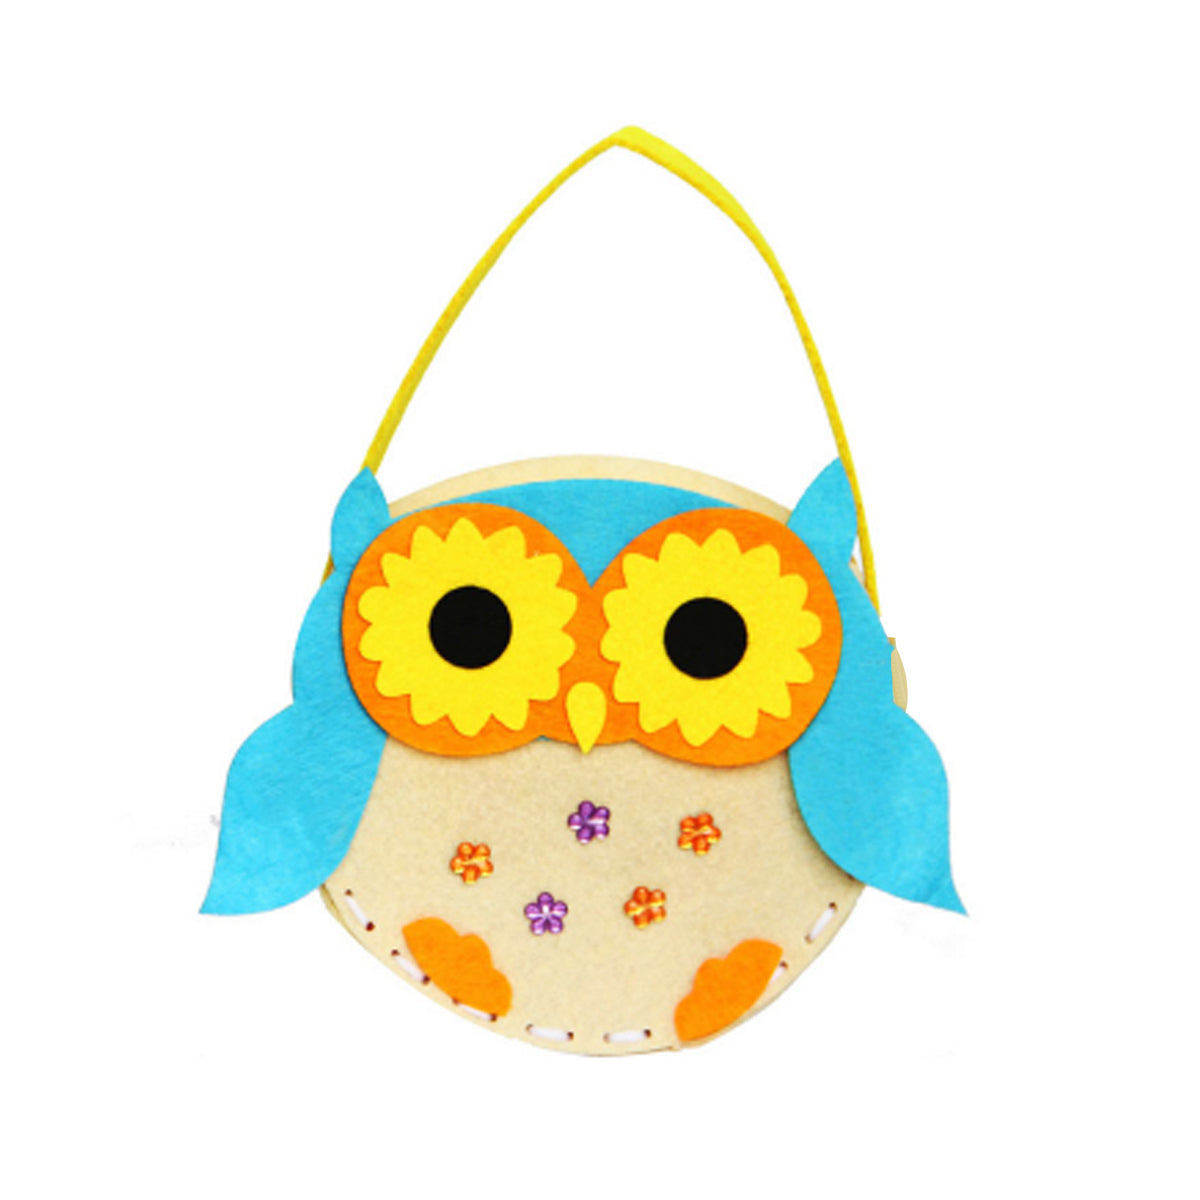 Wrapables DIY Novelty Party Purse (Set of 3), Butterfly, Cupcake, Owl